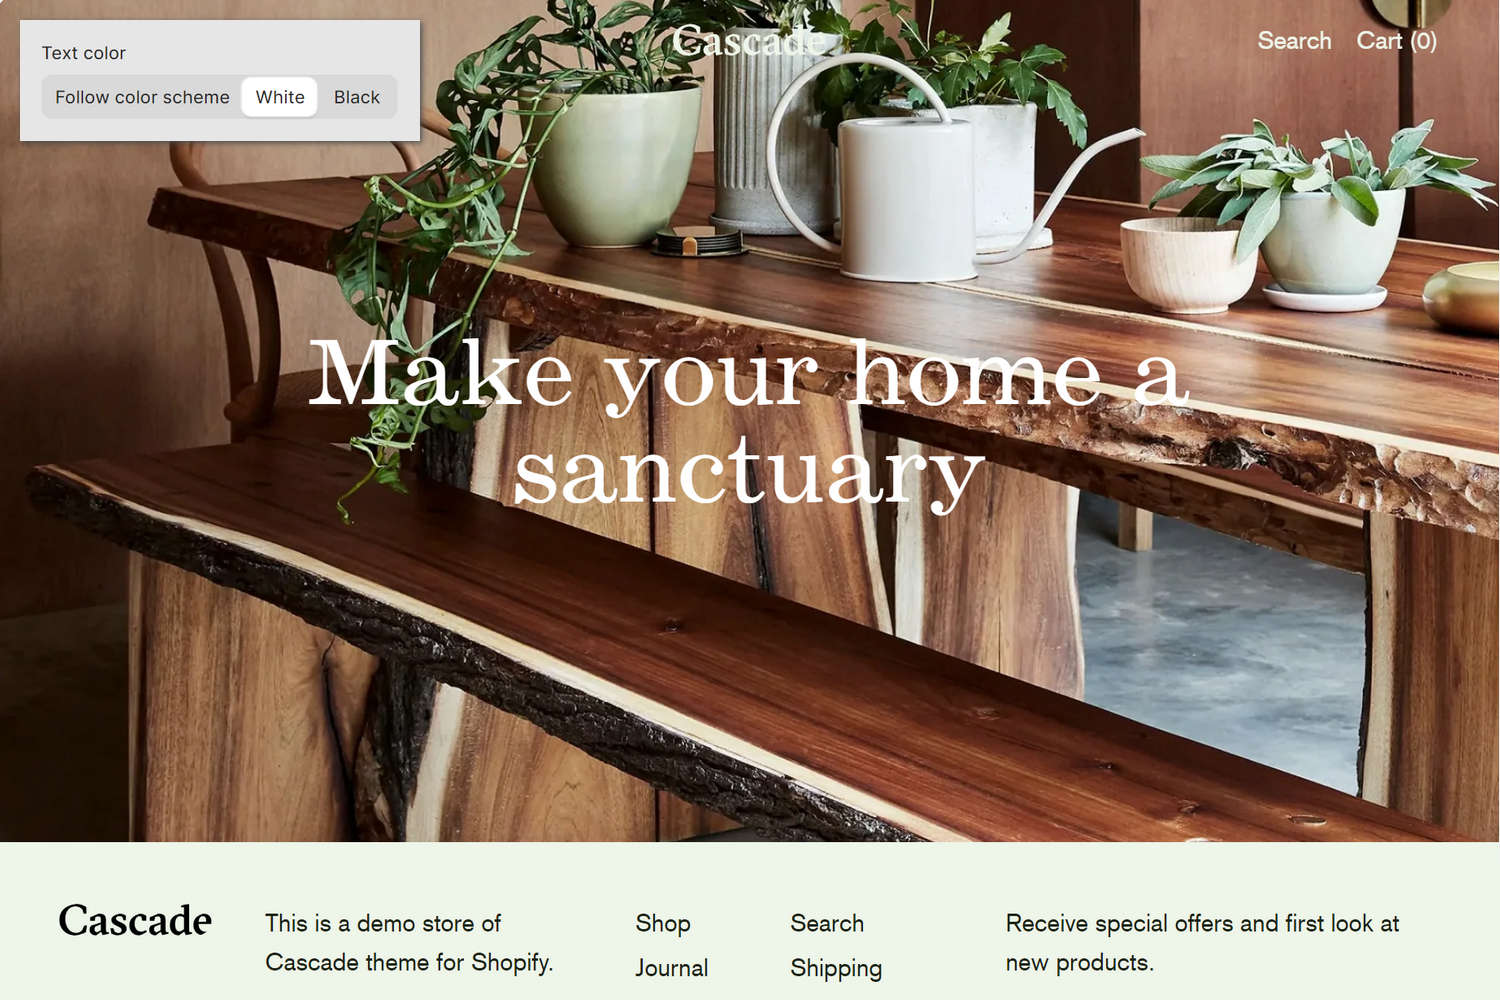 An example Image with text overlay section on a store's homepage.